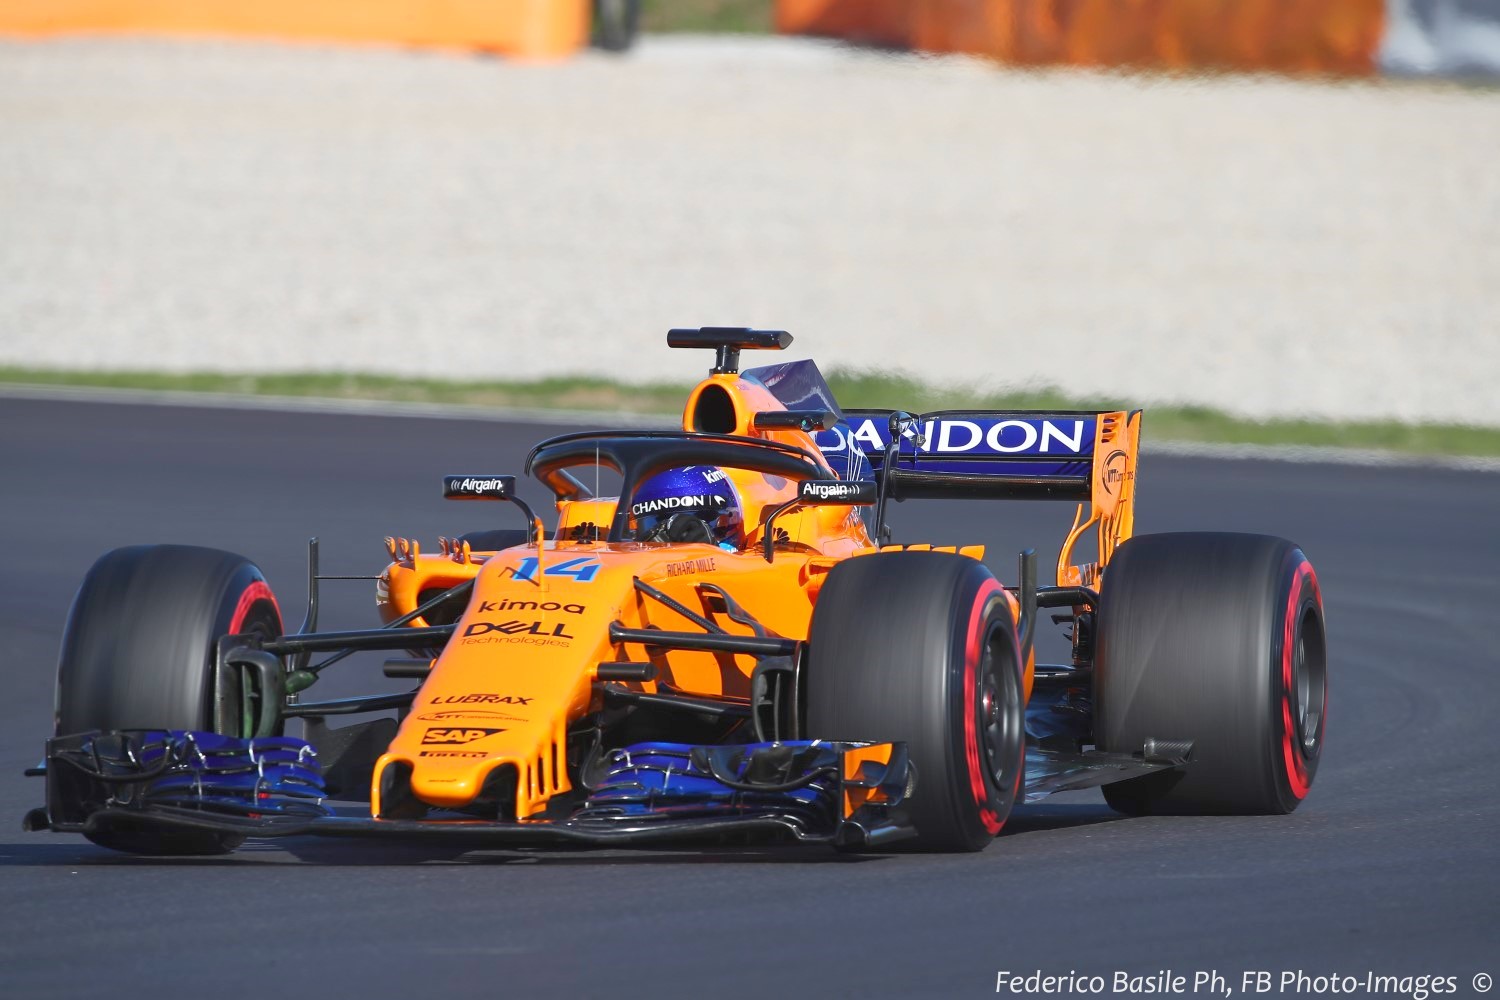 Alonso knows he won't have to worry about a restart procedure as it will probably be his McLaren causing the red flag broken down on the track